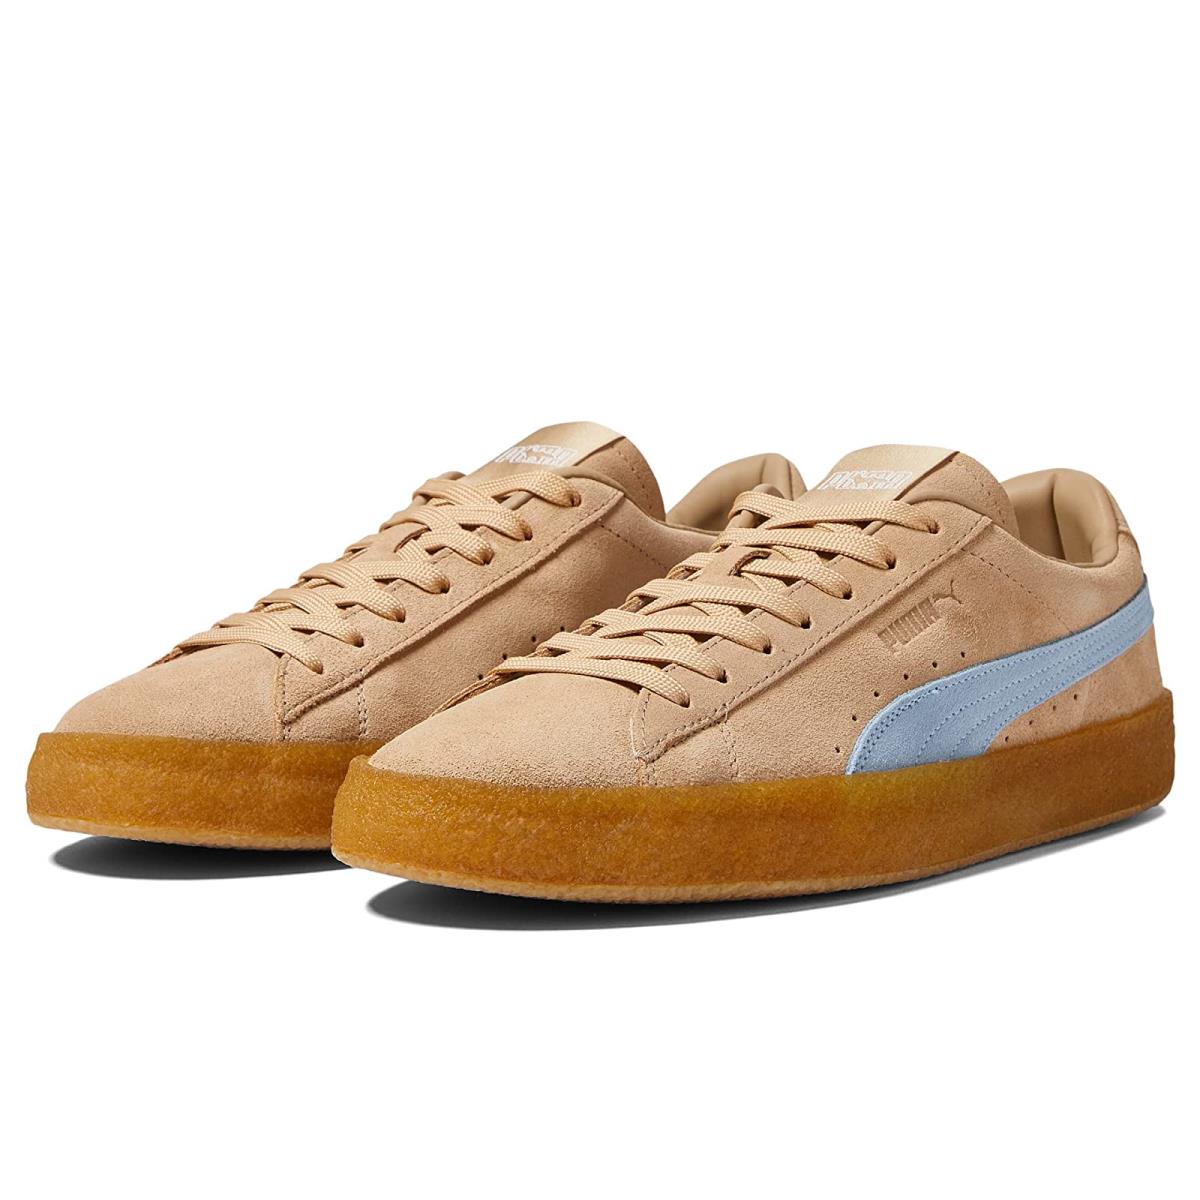 Man`s Sneakers Athletic Shoes Puma Suede Crepe Kitsune Travertine/Chambray Blue